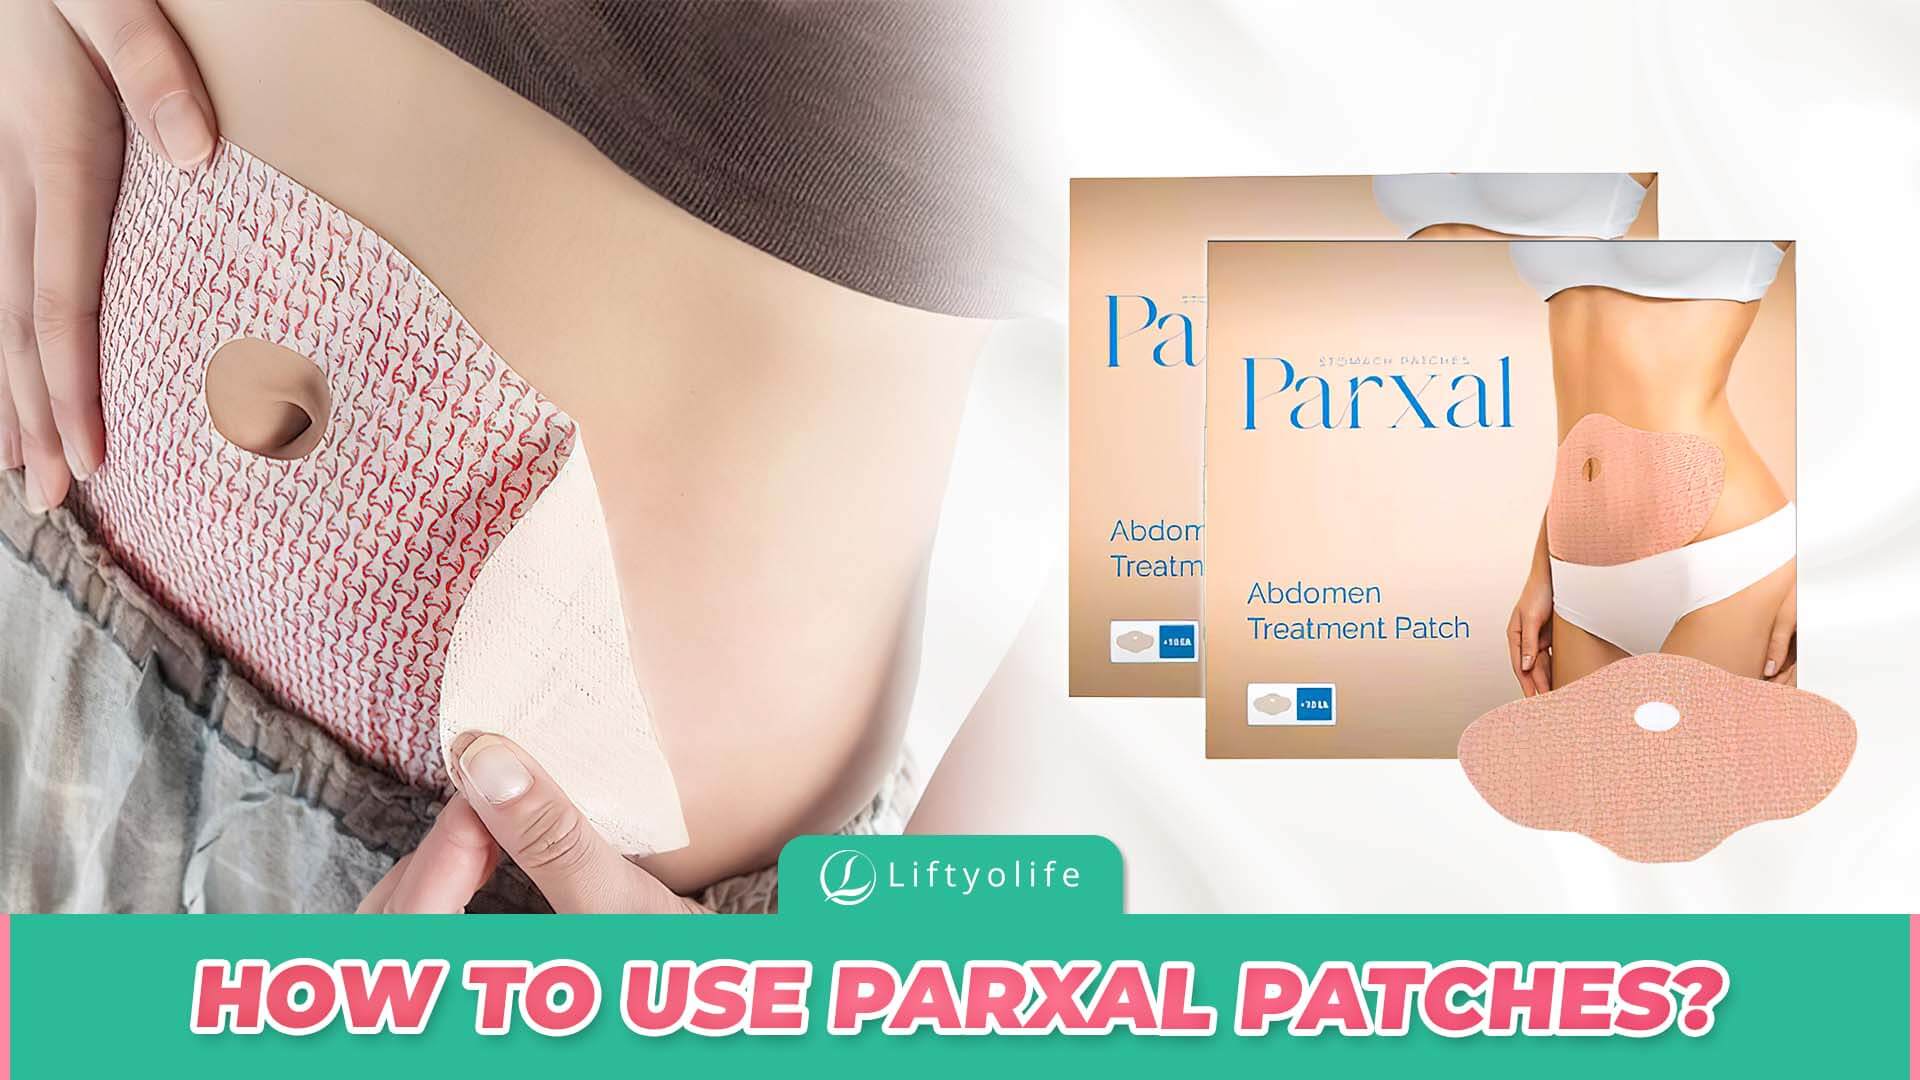 How To Use Parxal Patches?